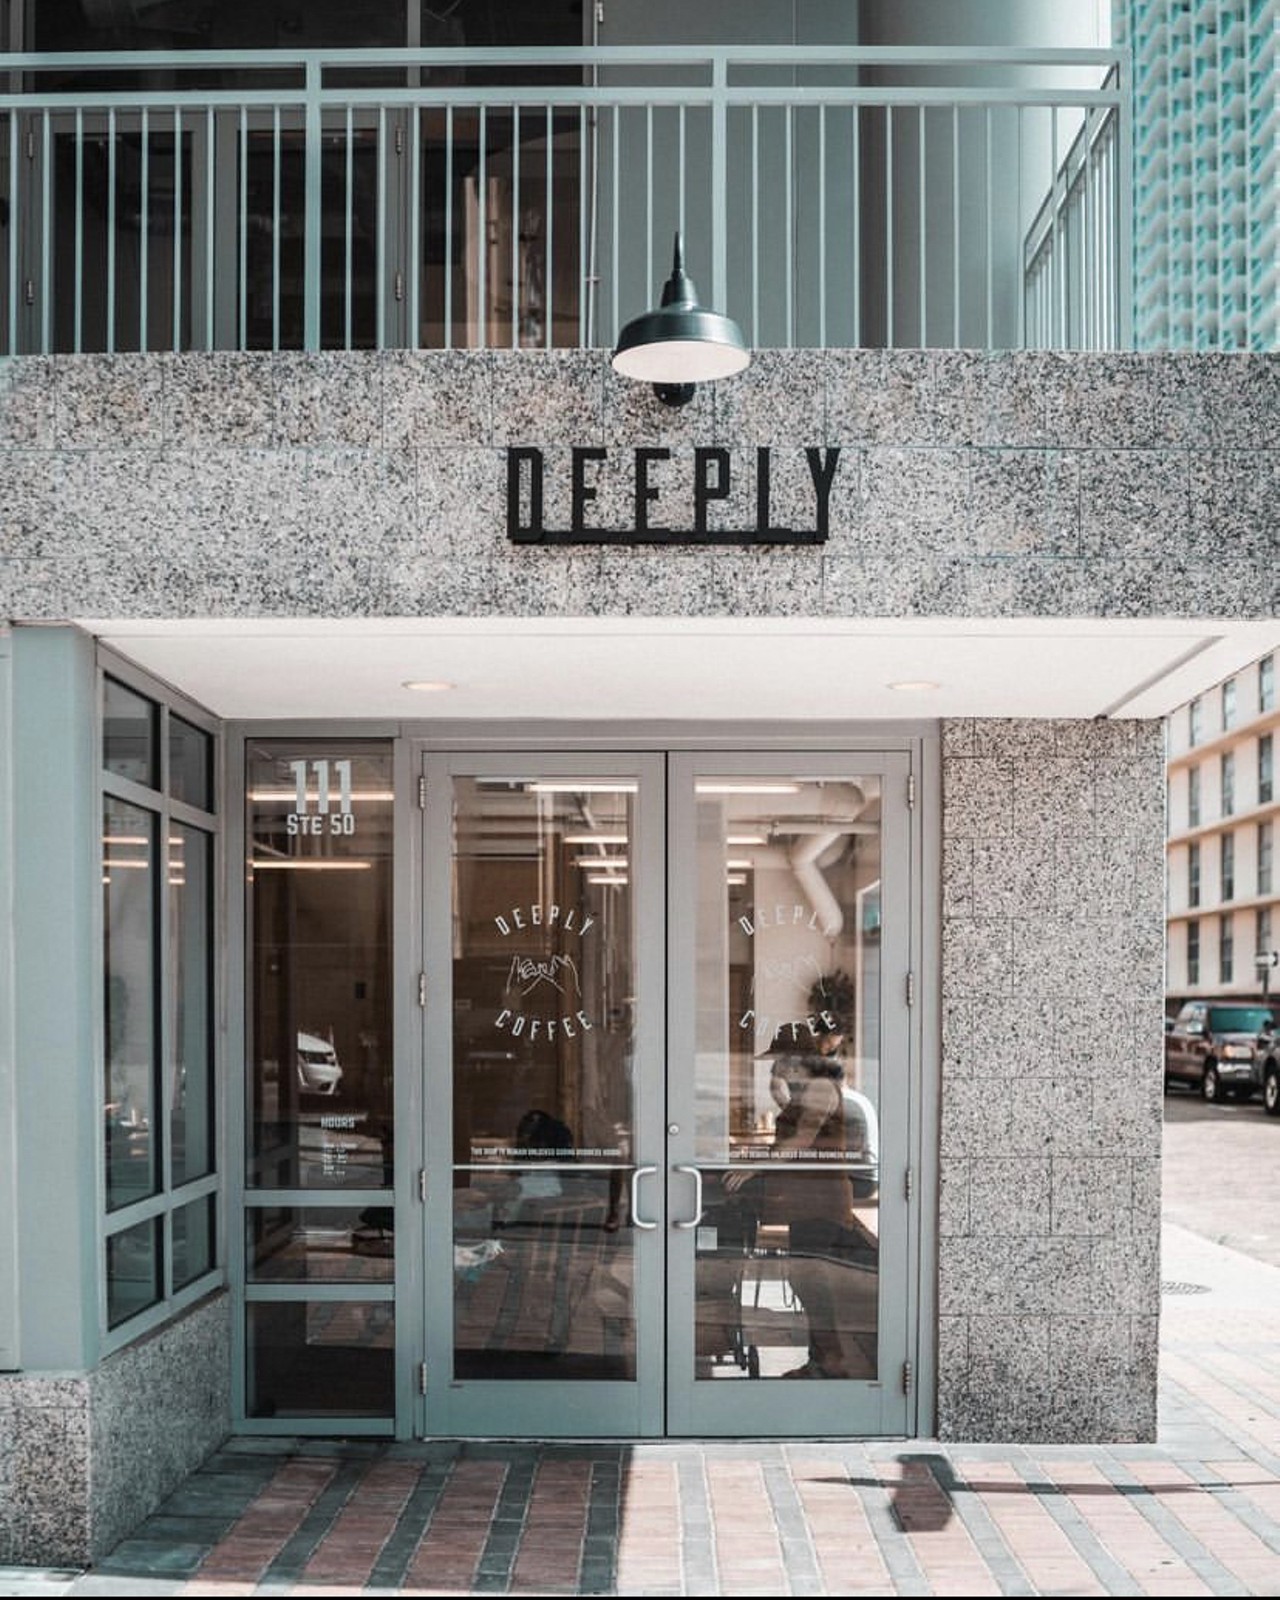 Deeply Coffee 
111 N Magnolia Ave #50, Orlando, FL 32801
They have delicious tea, coffee and waffles. For pet owners they have some outdoor seating on the side of the building where you can enjoy your treats with them.
Photo via Deeply Coffee/Instagram